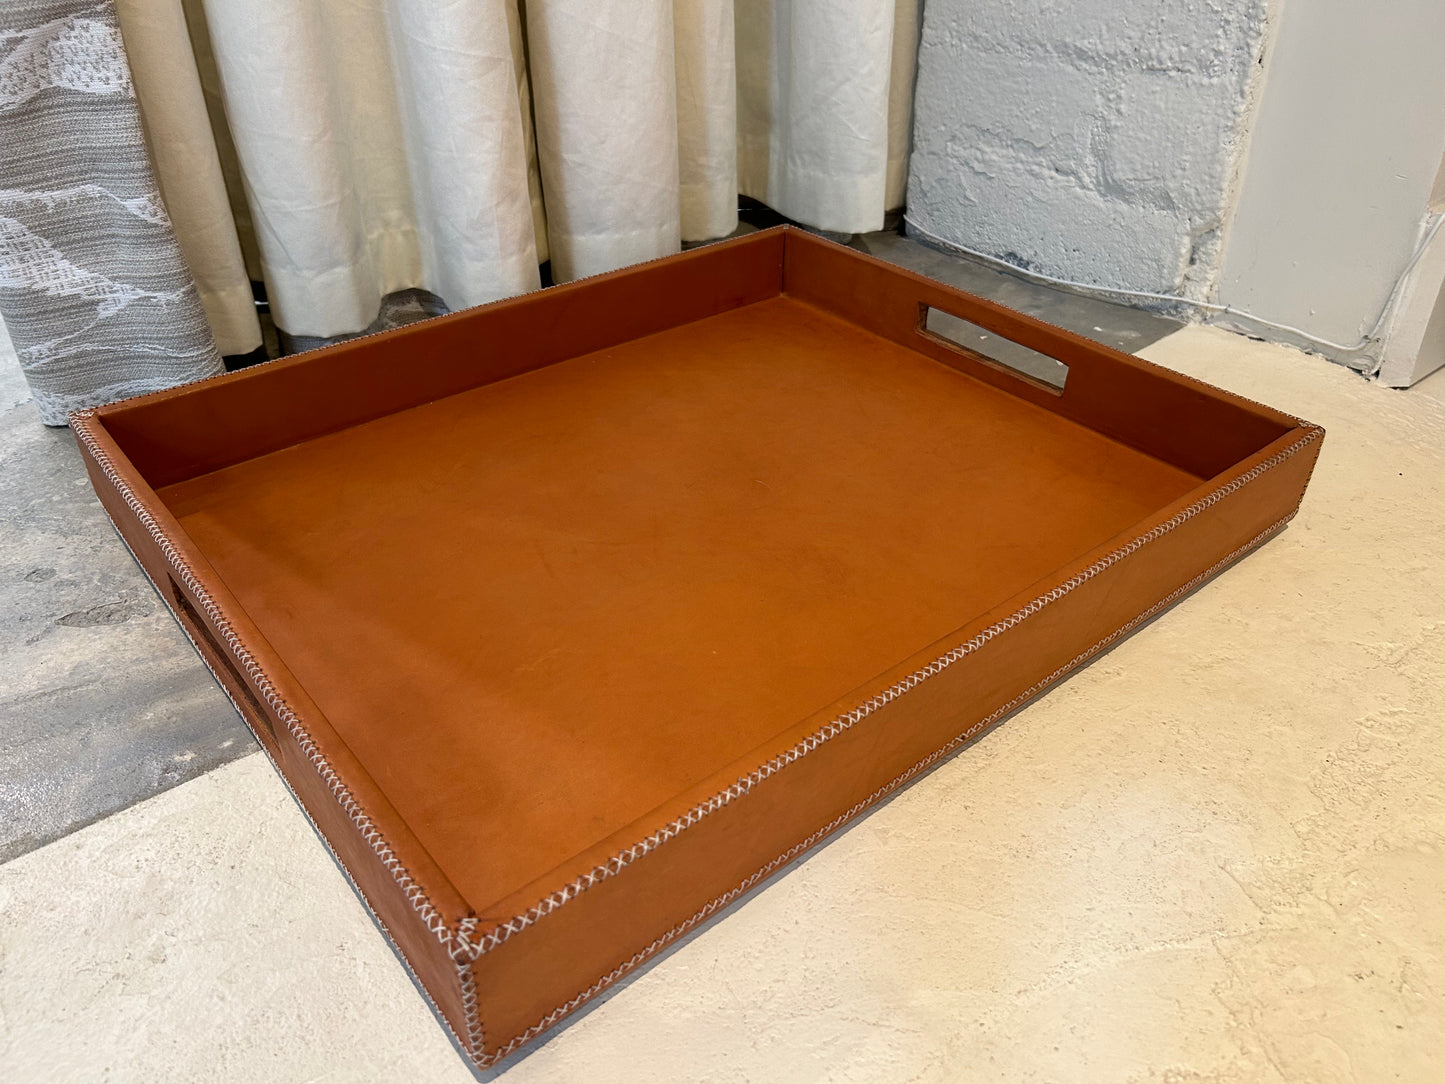 Libros Large Leather Rectangle Ottoman Tray